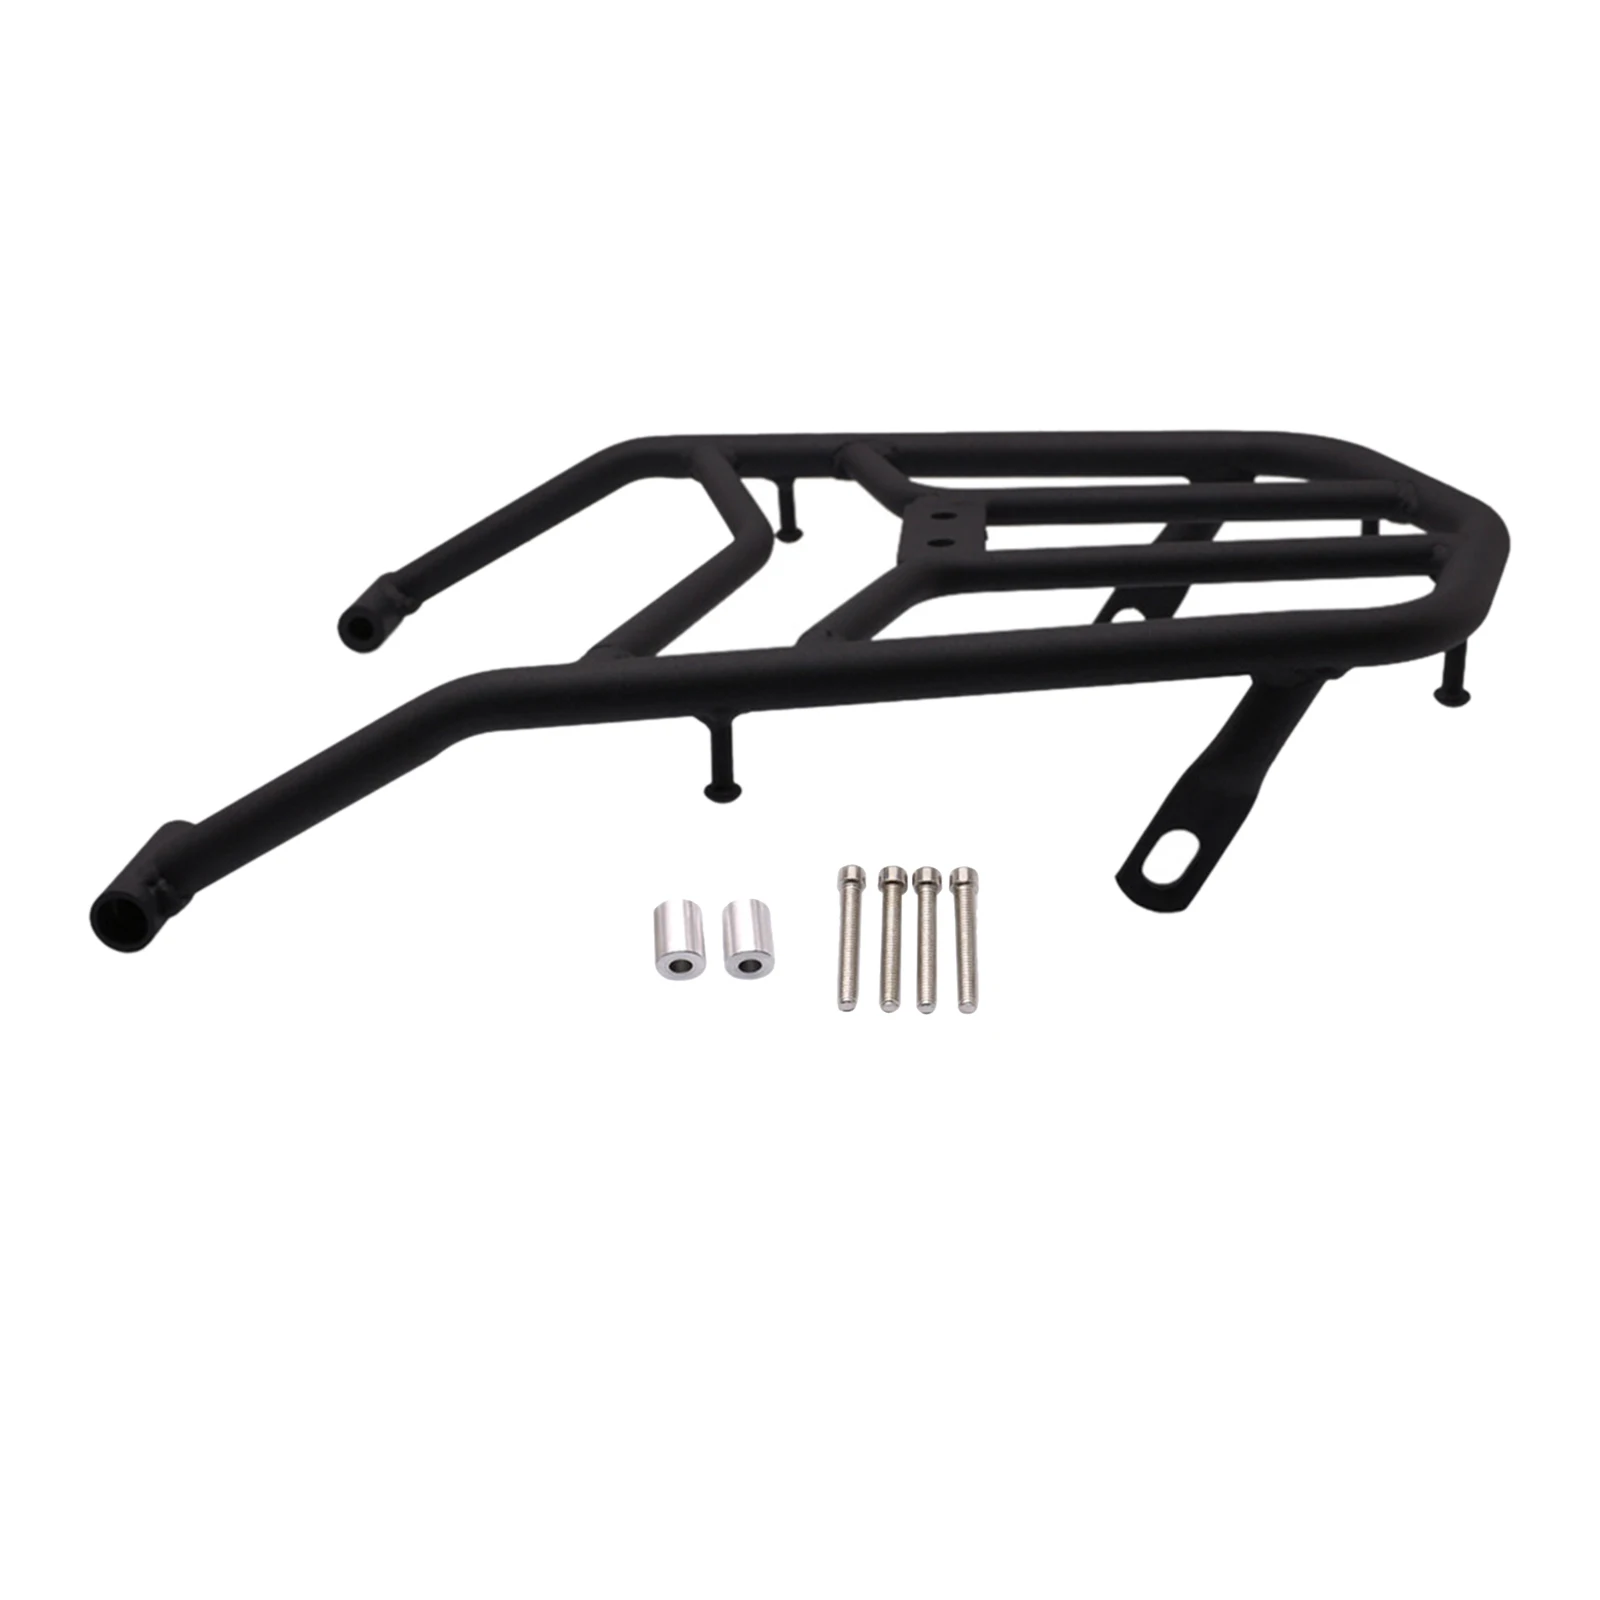 

Rear Shelf Luggage Rack Tail Seat Extension Mount for Honda CRF250L CRF250M CRF250 RALLY 2012-2019, Black